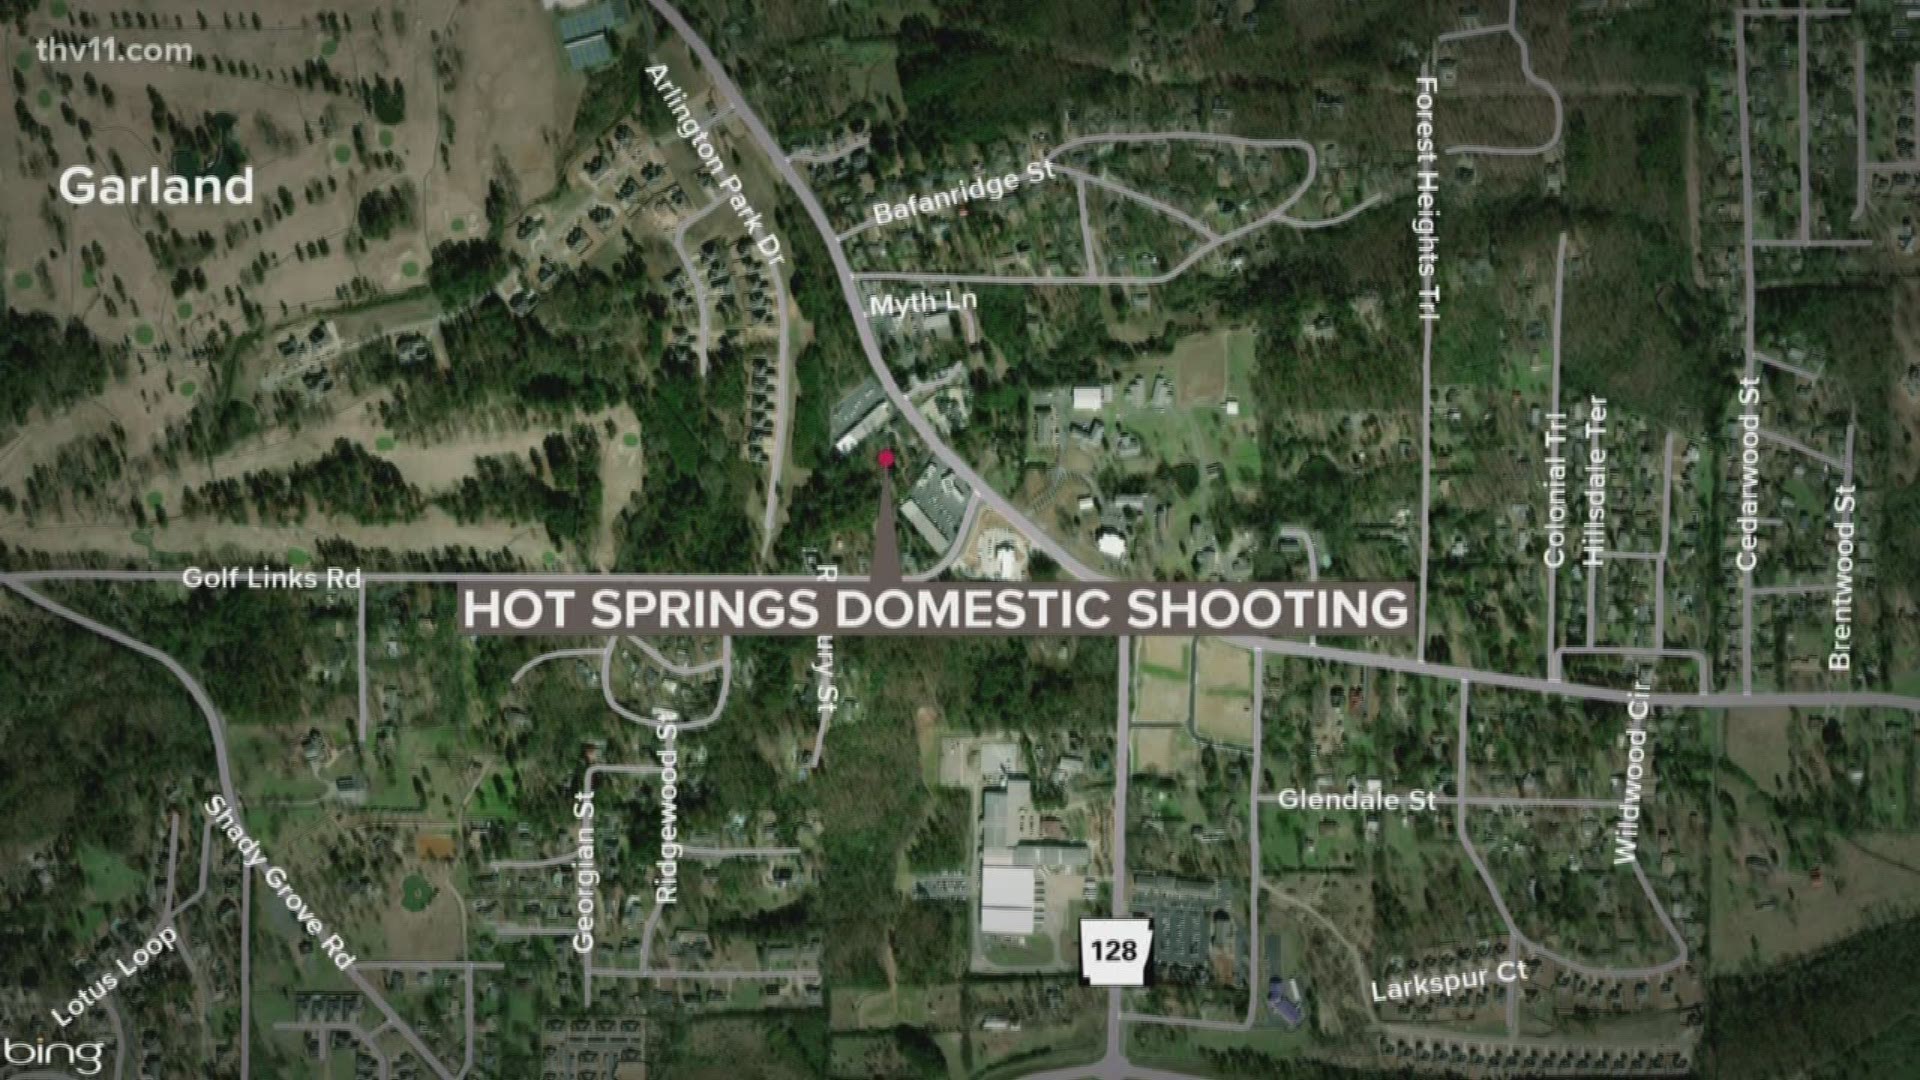 Hot Springs police are investigating a domestic violence-related shooting.